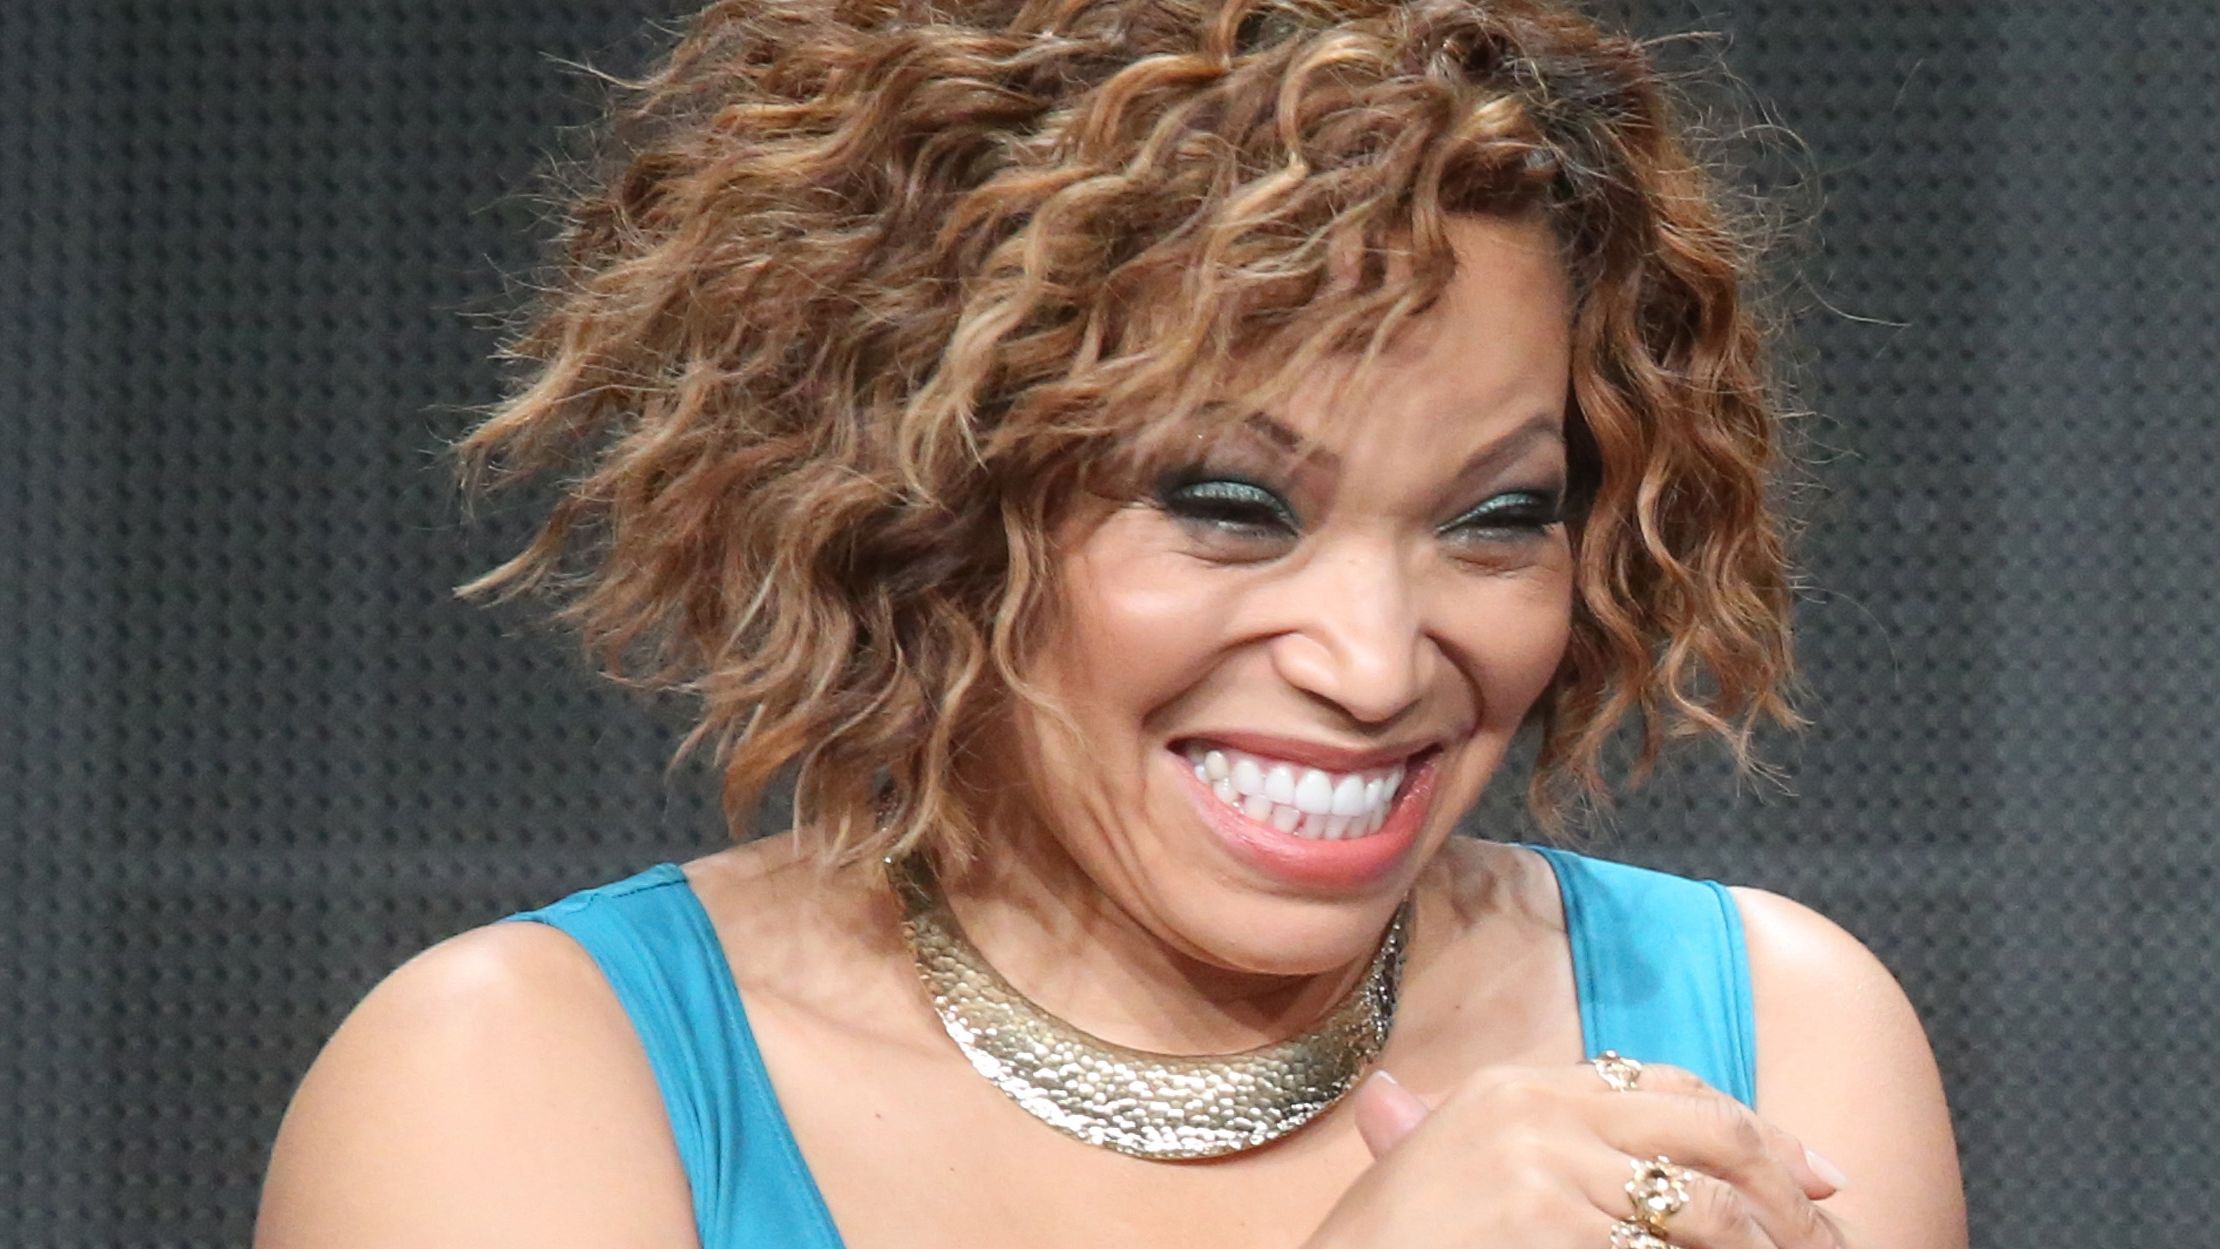 Actress Tisha Campbell-Martin has released a new music video after more than 20 years.